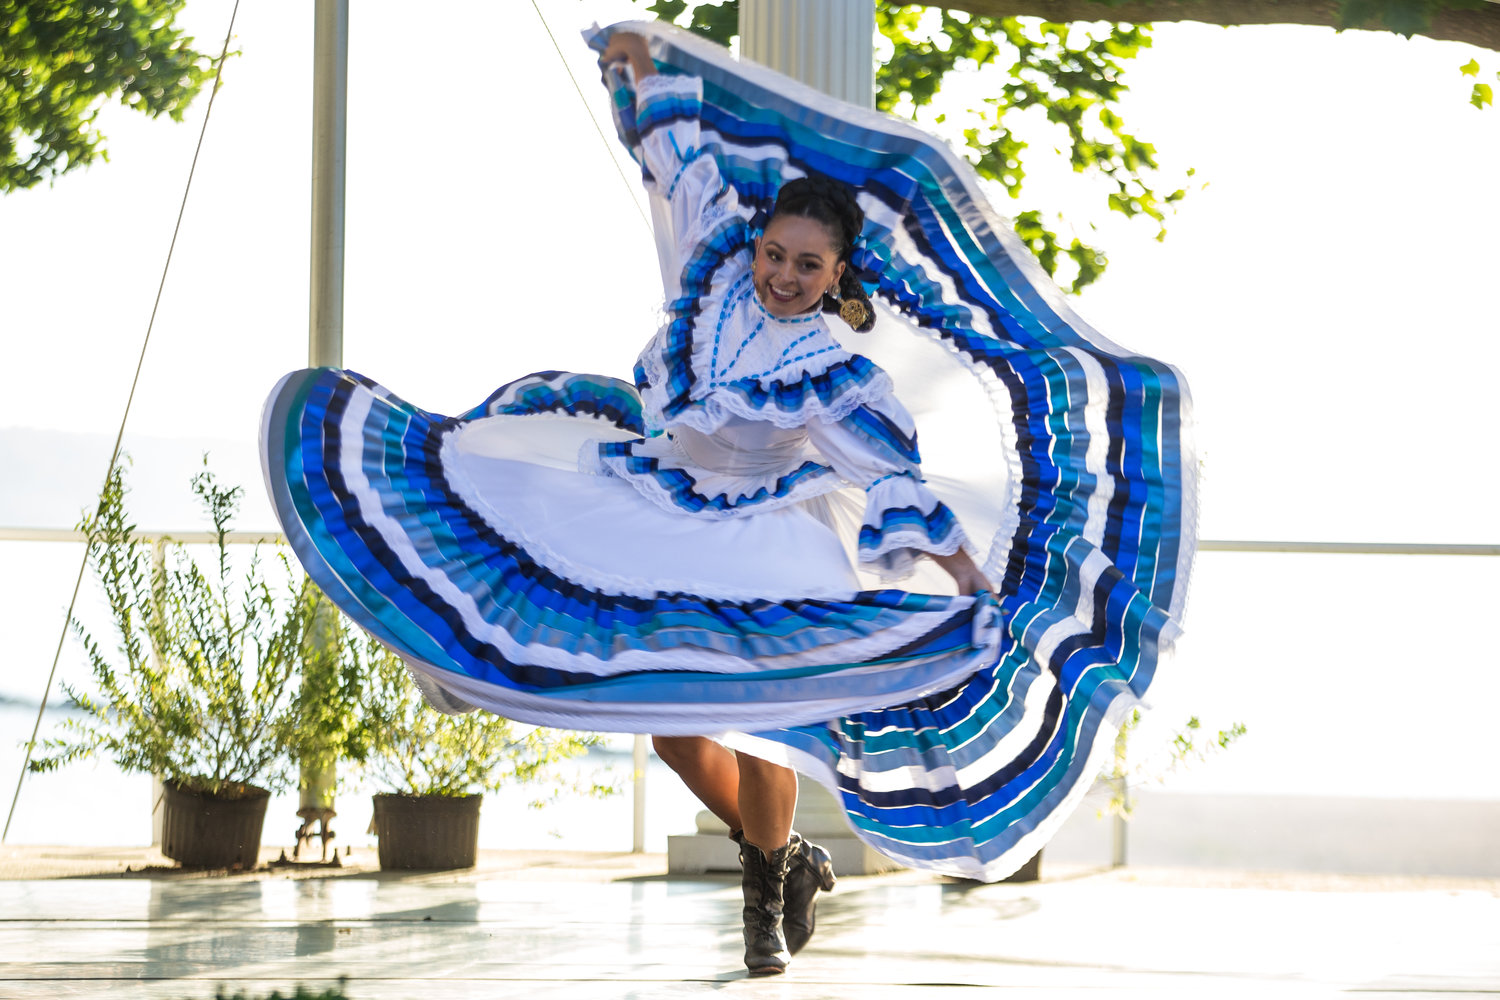 There were cheers when Maricarmen Betancourt, a dancer from Ballet Nepantla, performed.